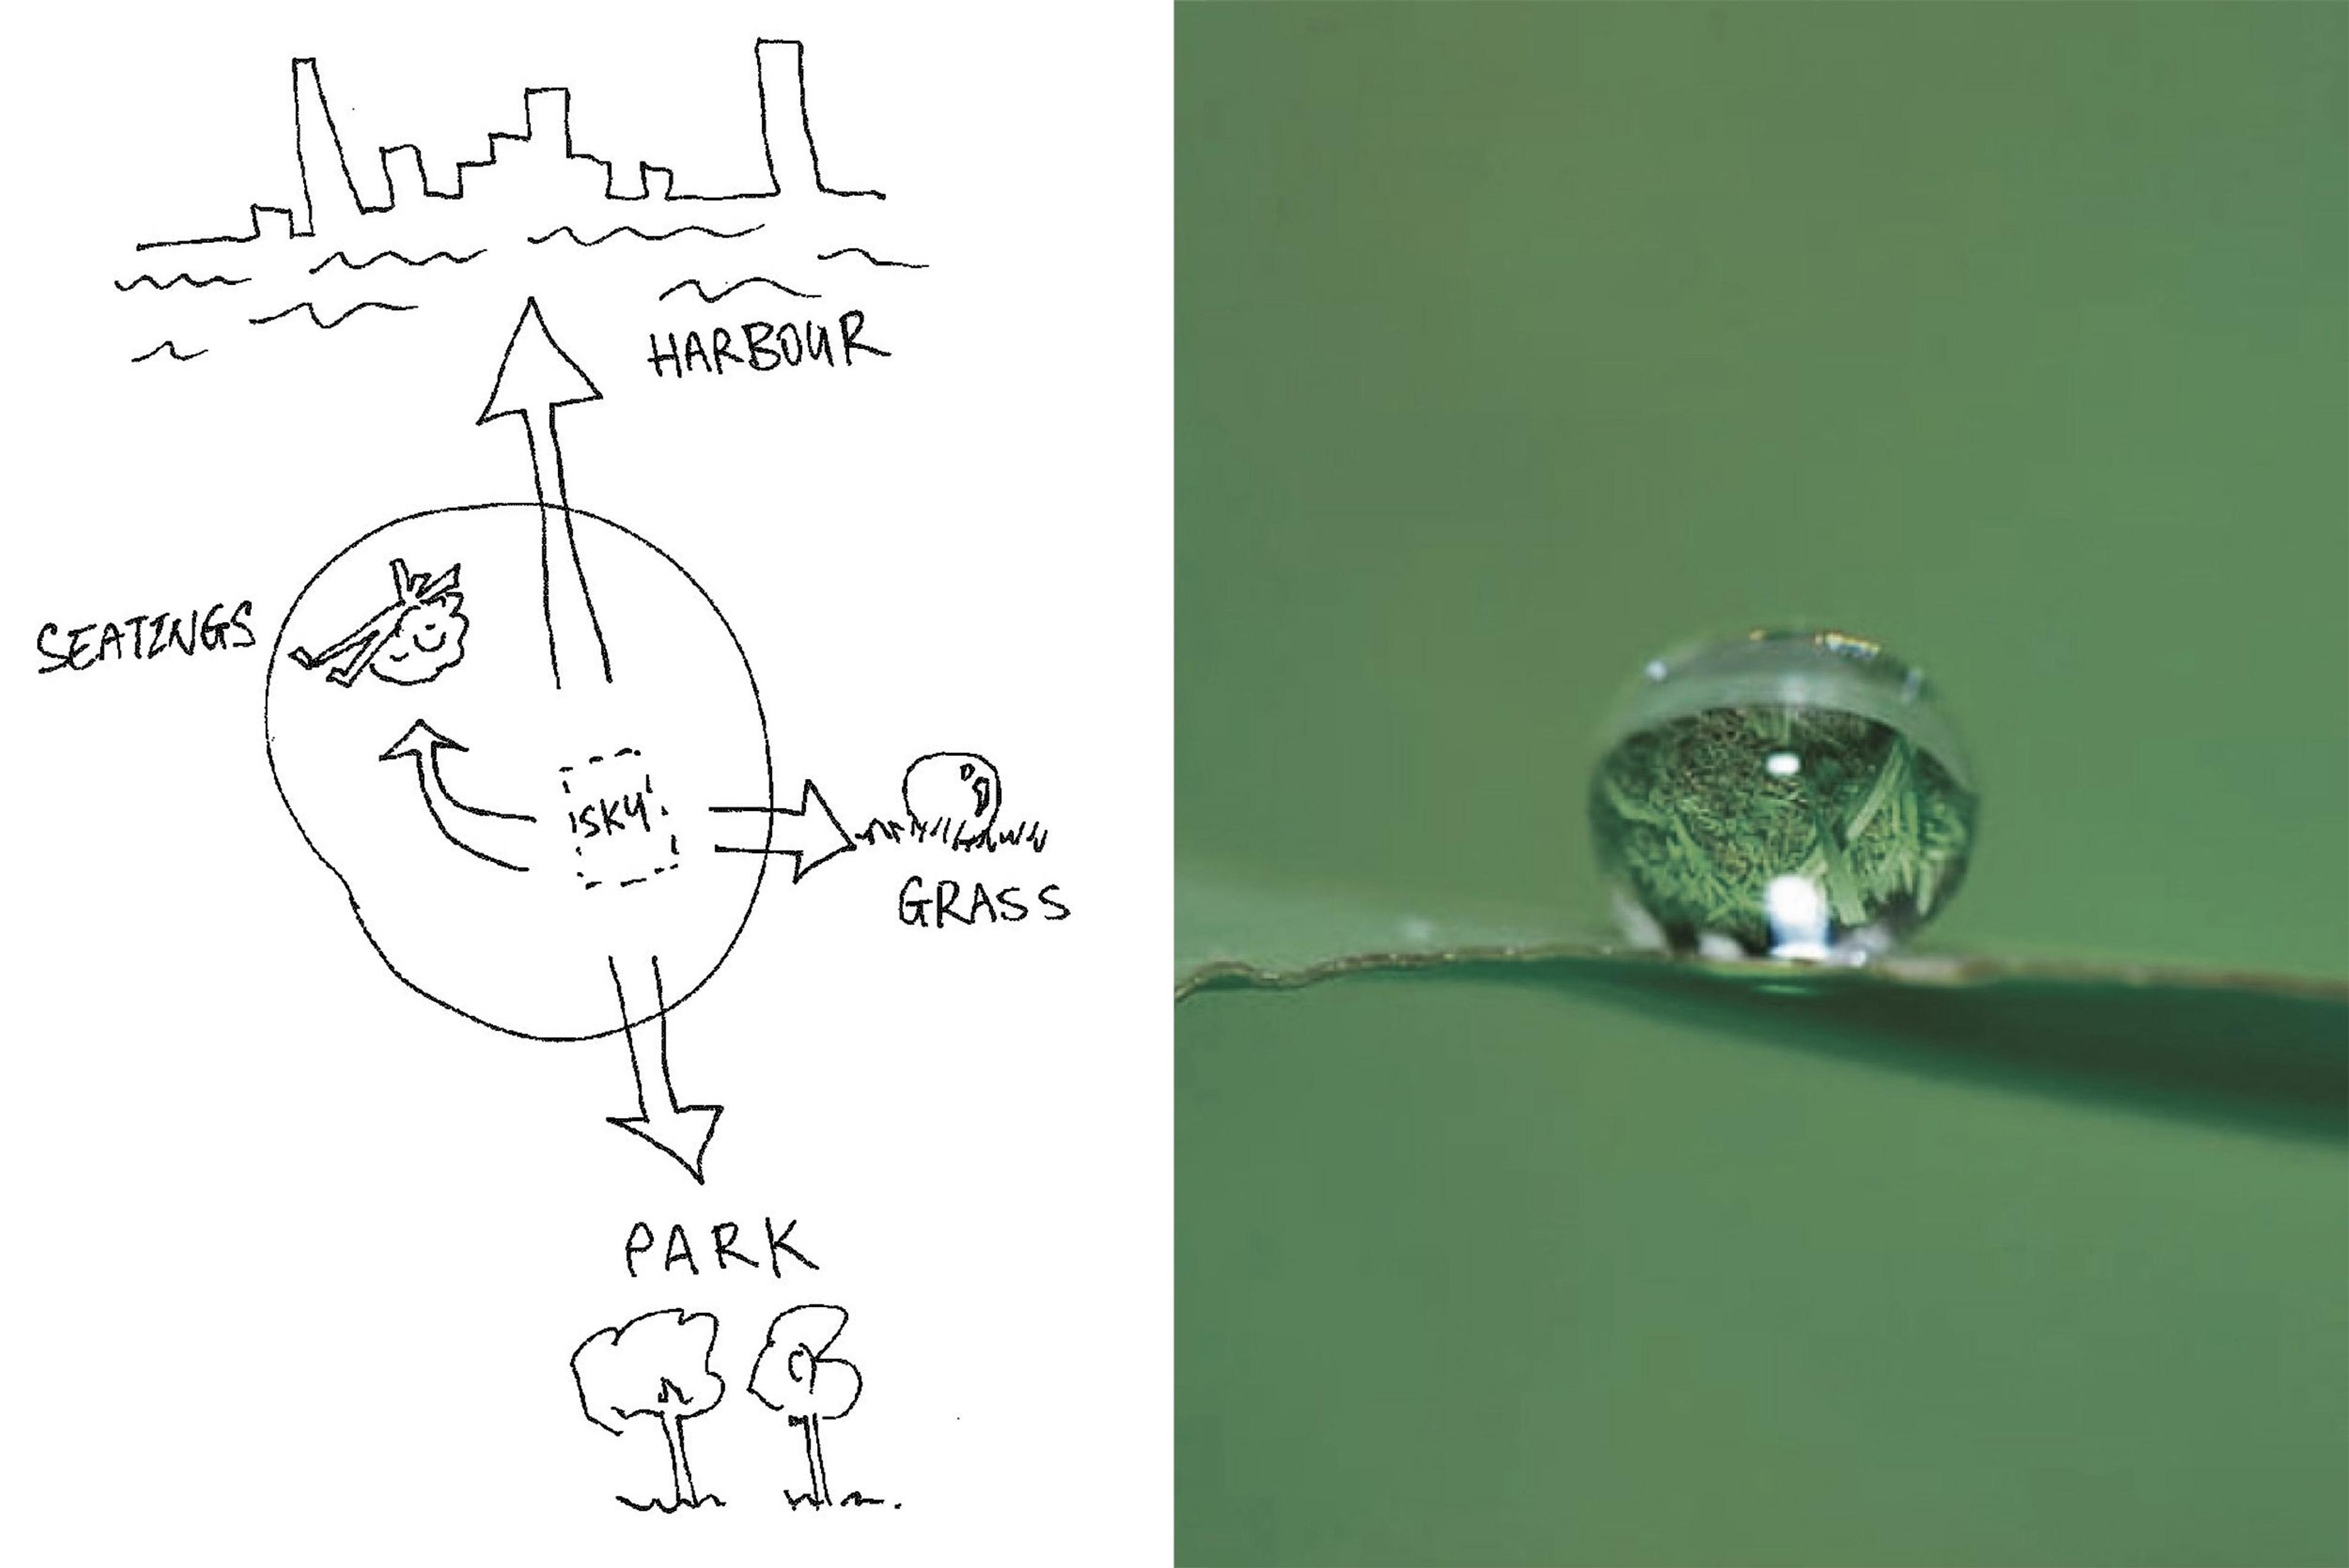 inspiration from water droplet